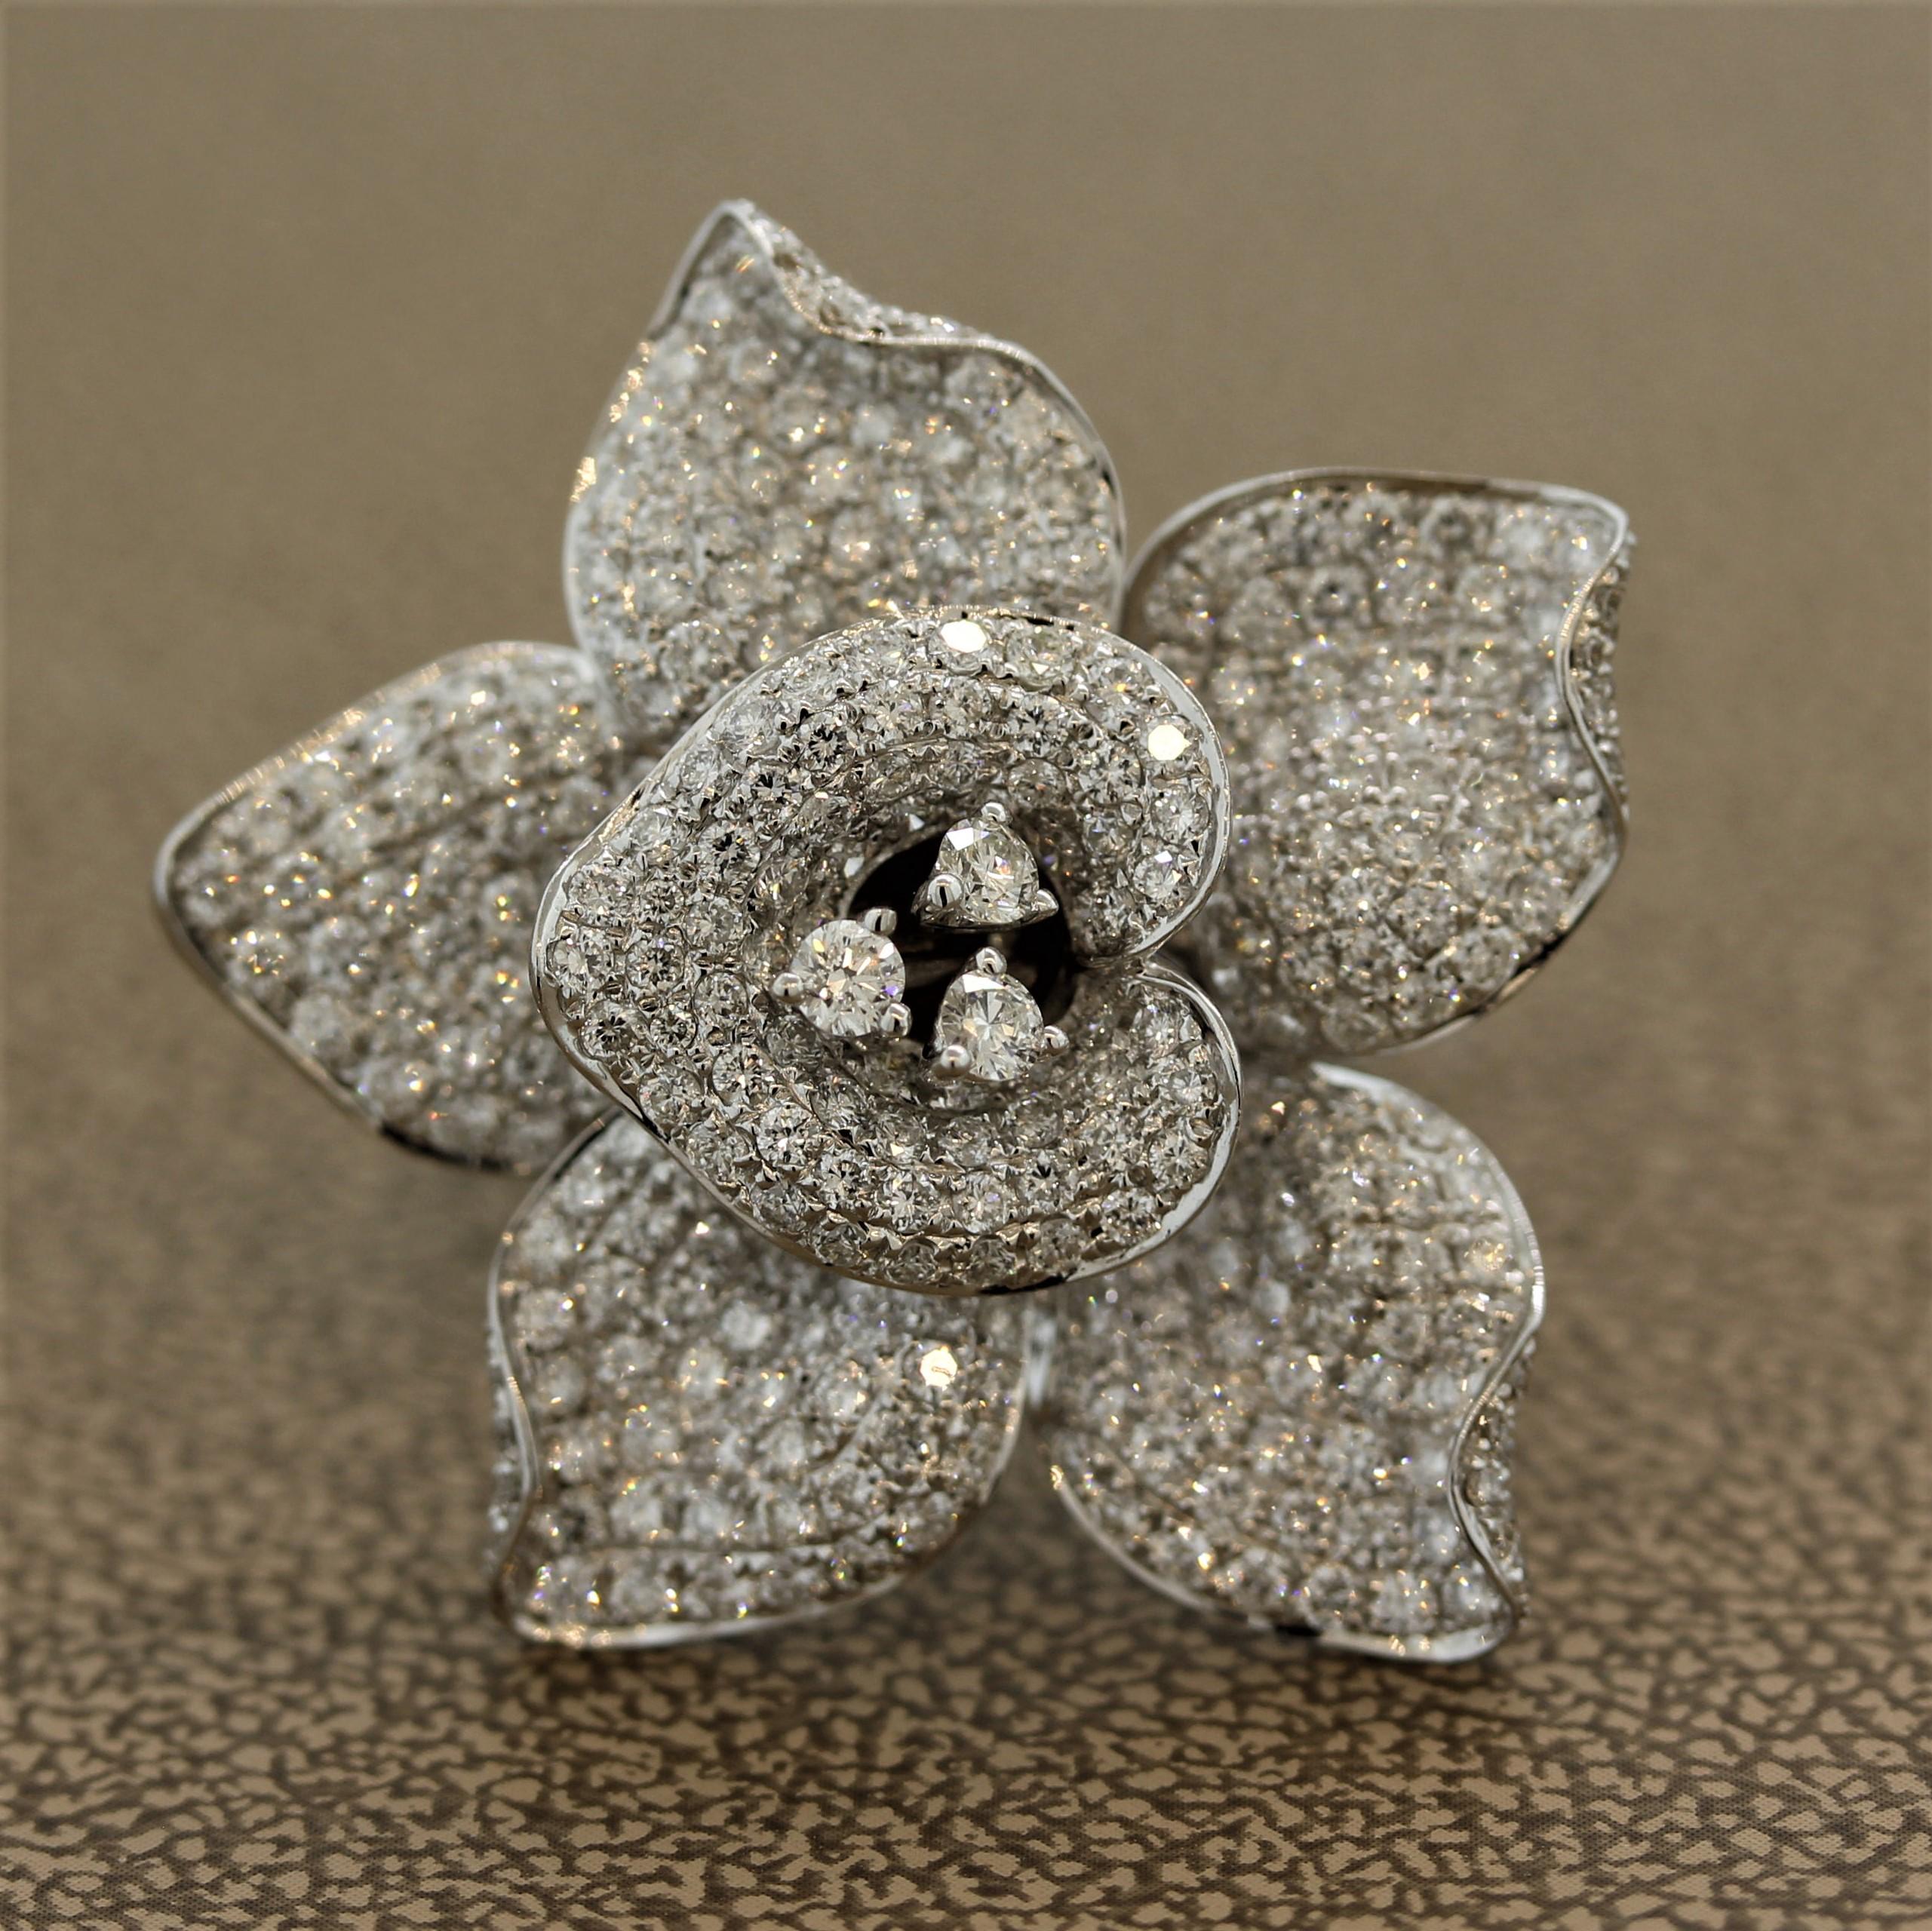 A diamond studded flower in full bloom! This unique piece features pave set round brilliant cut diamonds weighing 2.93 carats. They are set across the entire flower with 3 larger diamonds set in the center. Made in 18k white gold and ready to accent